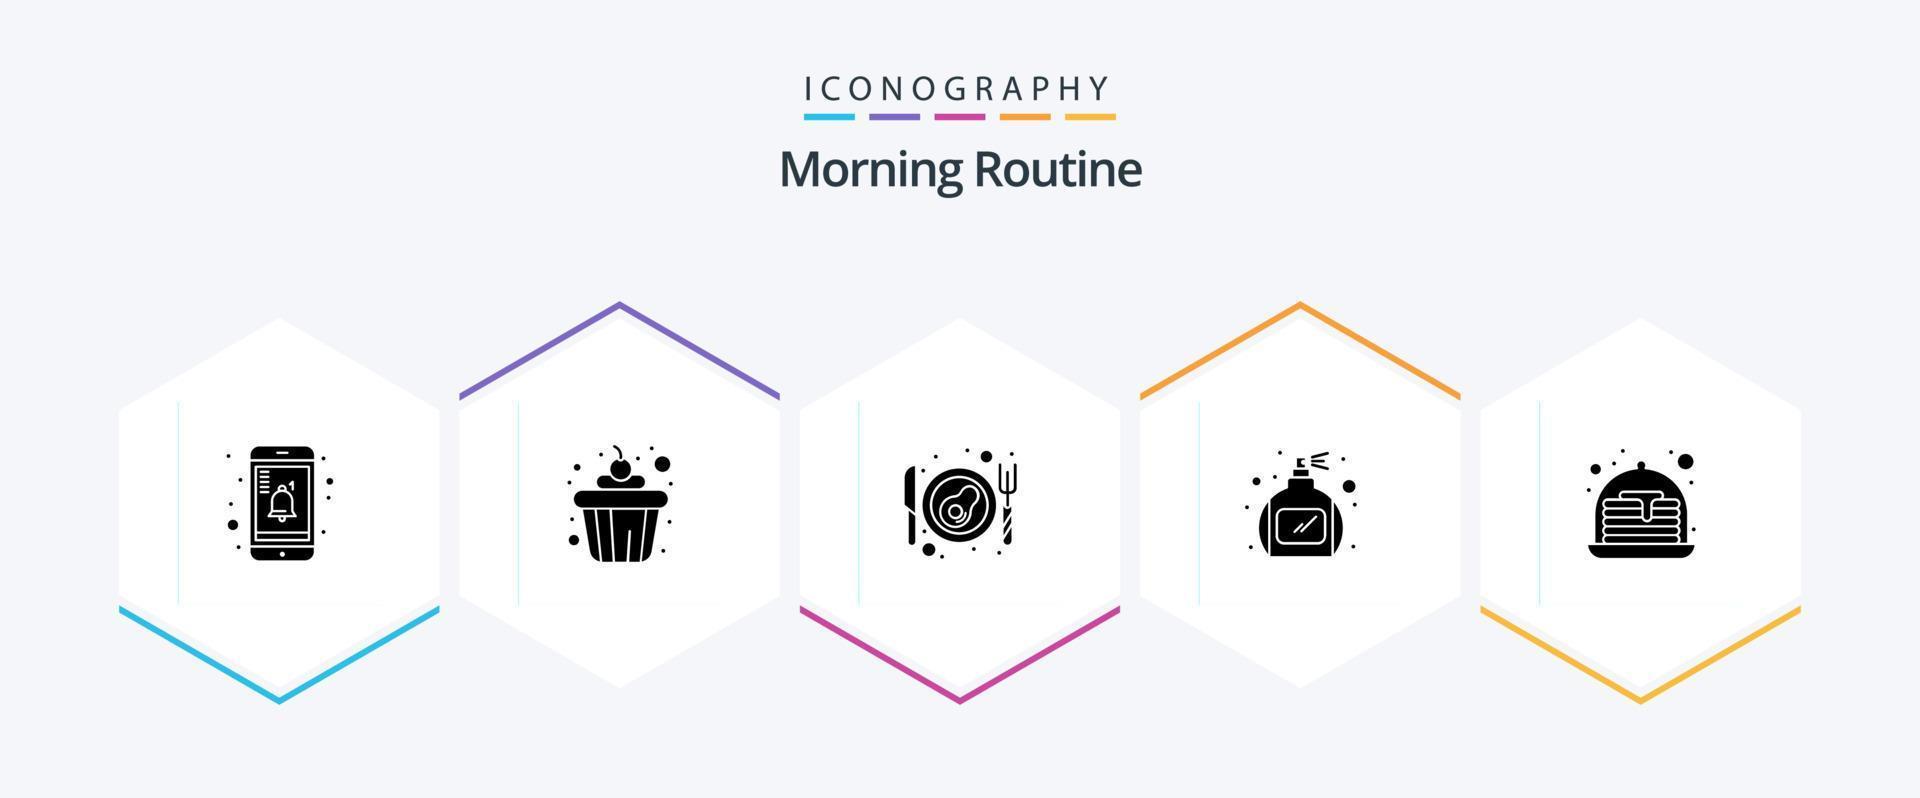 Morning Routine 25 Glyph icon pack including . . egg. sweets. cake vector